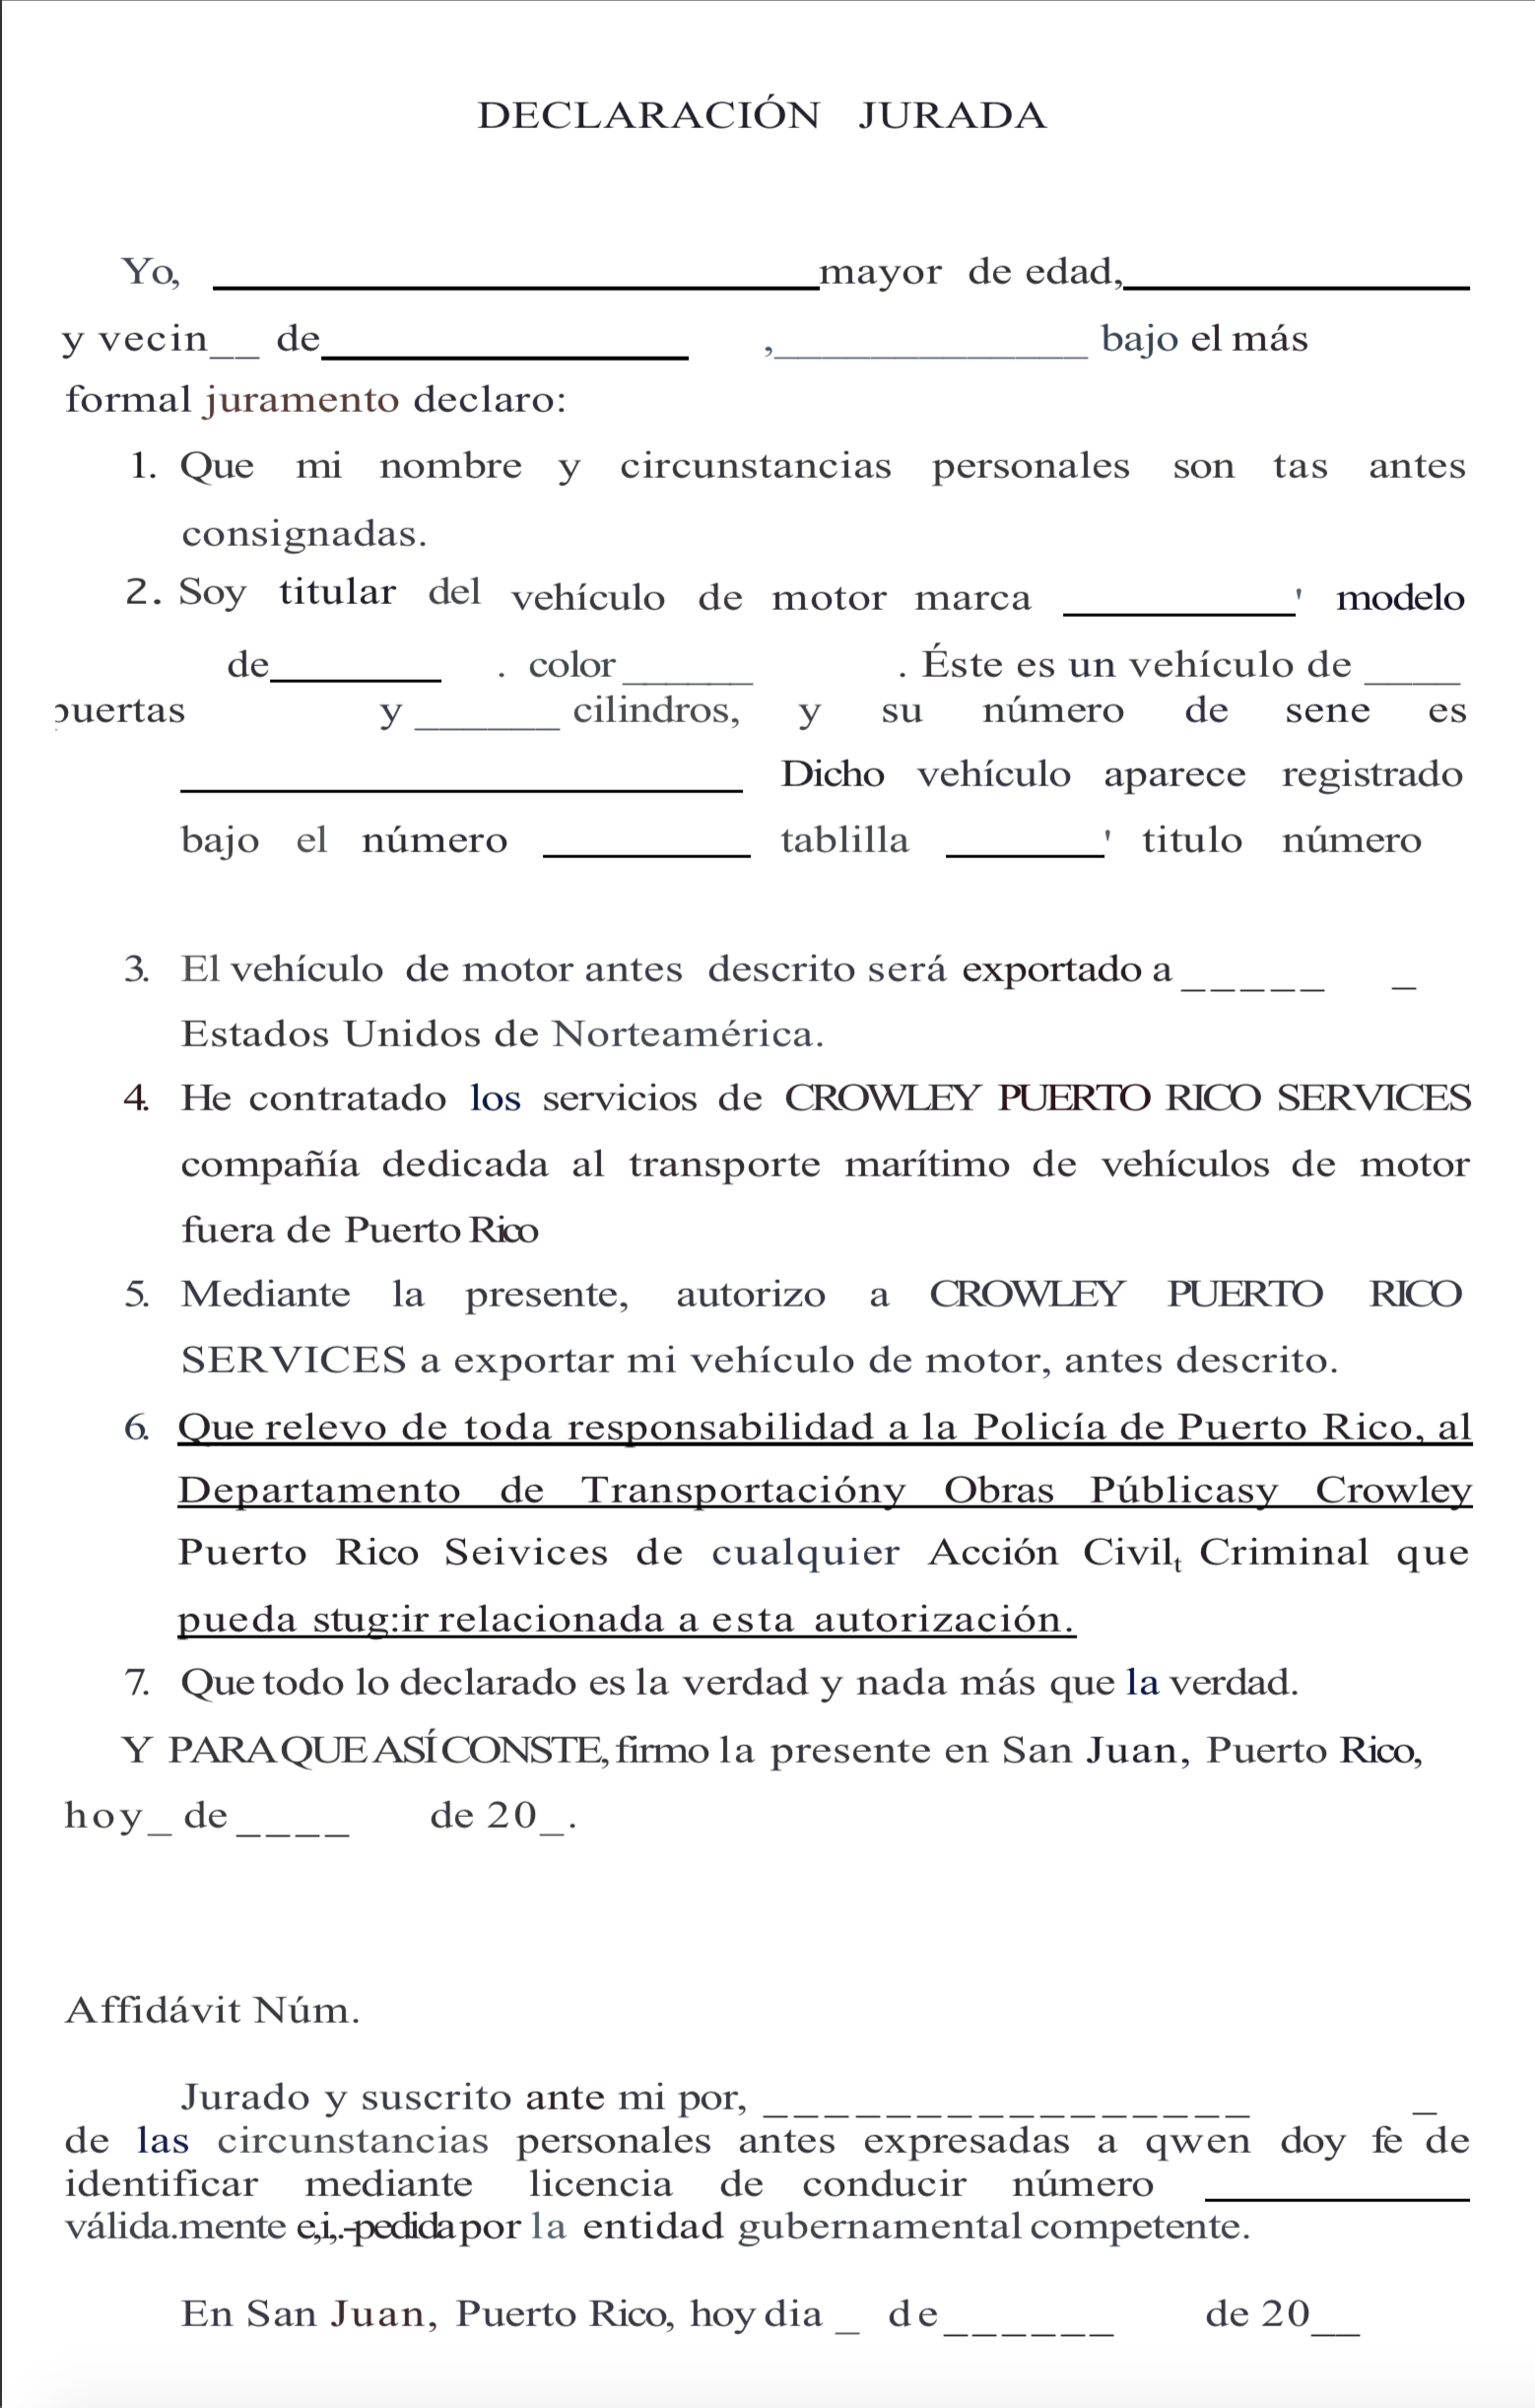 Sample Affidavits For Various Situations